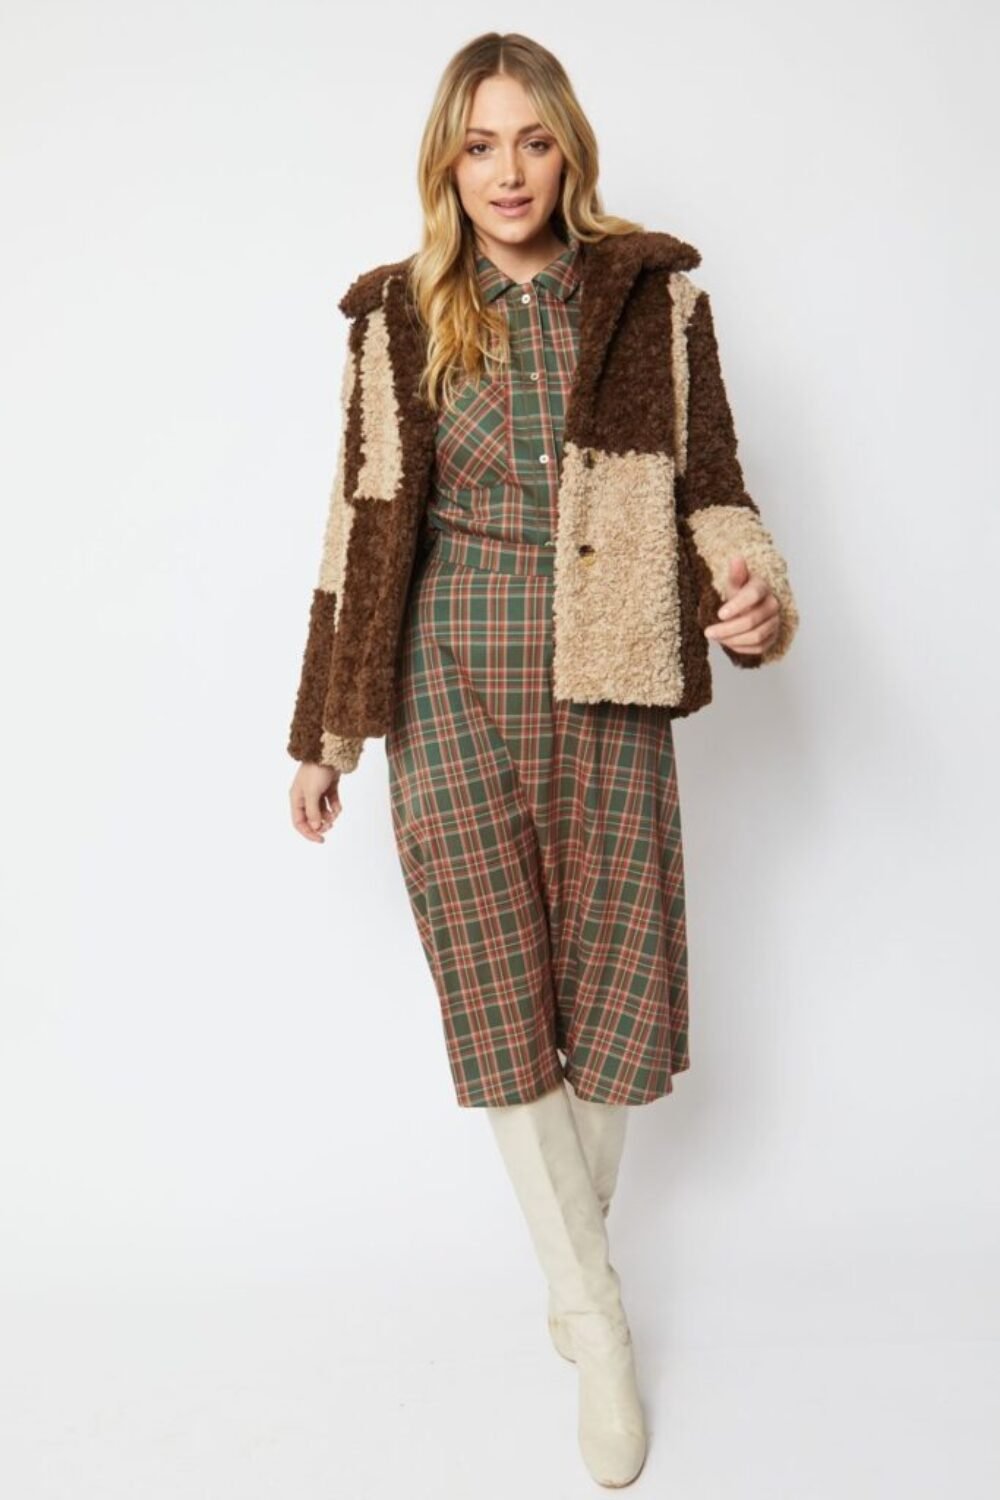 Shop Lux Mocha Faux Shearling Checkered Oversized Coat and women's luxury and designer clothes at www.lux-apparel.co.uk